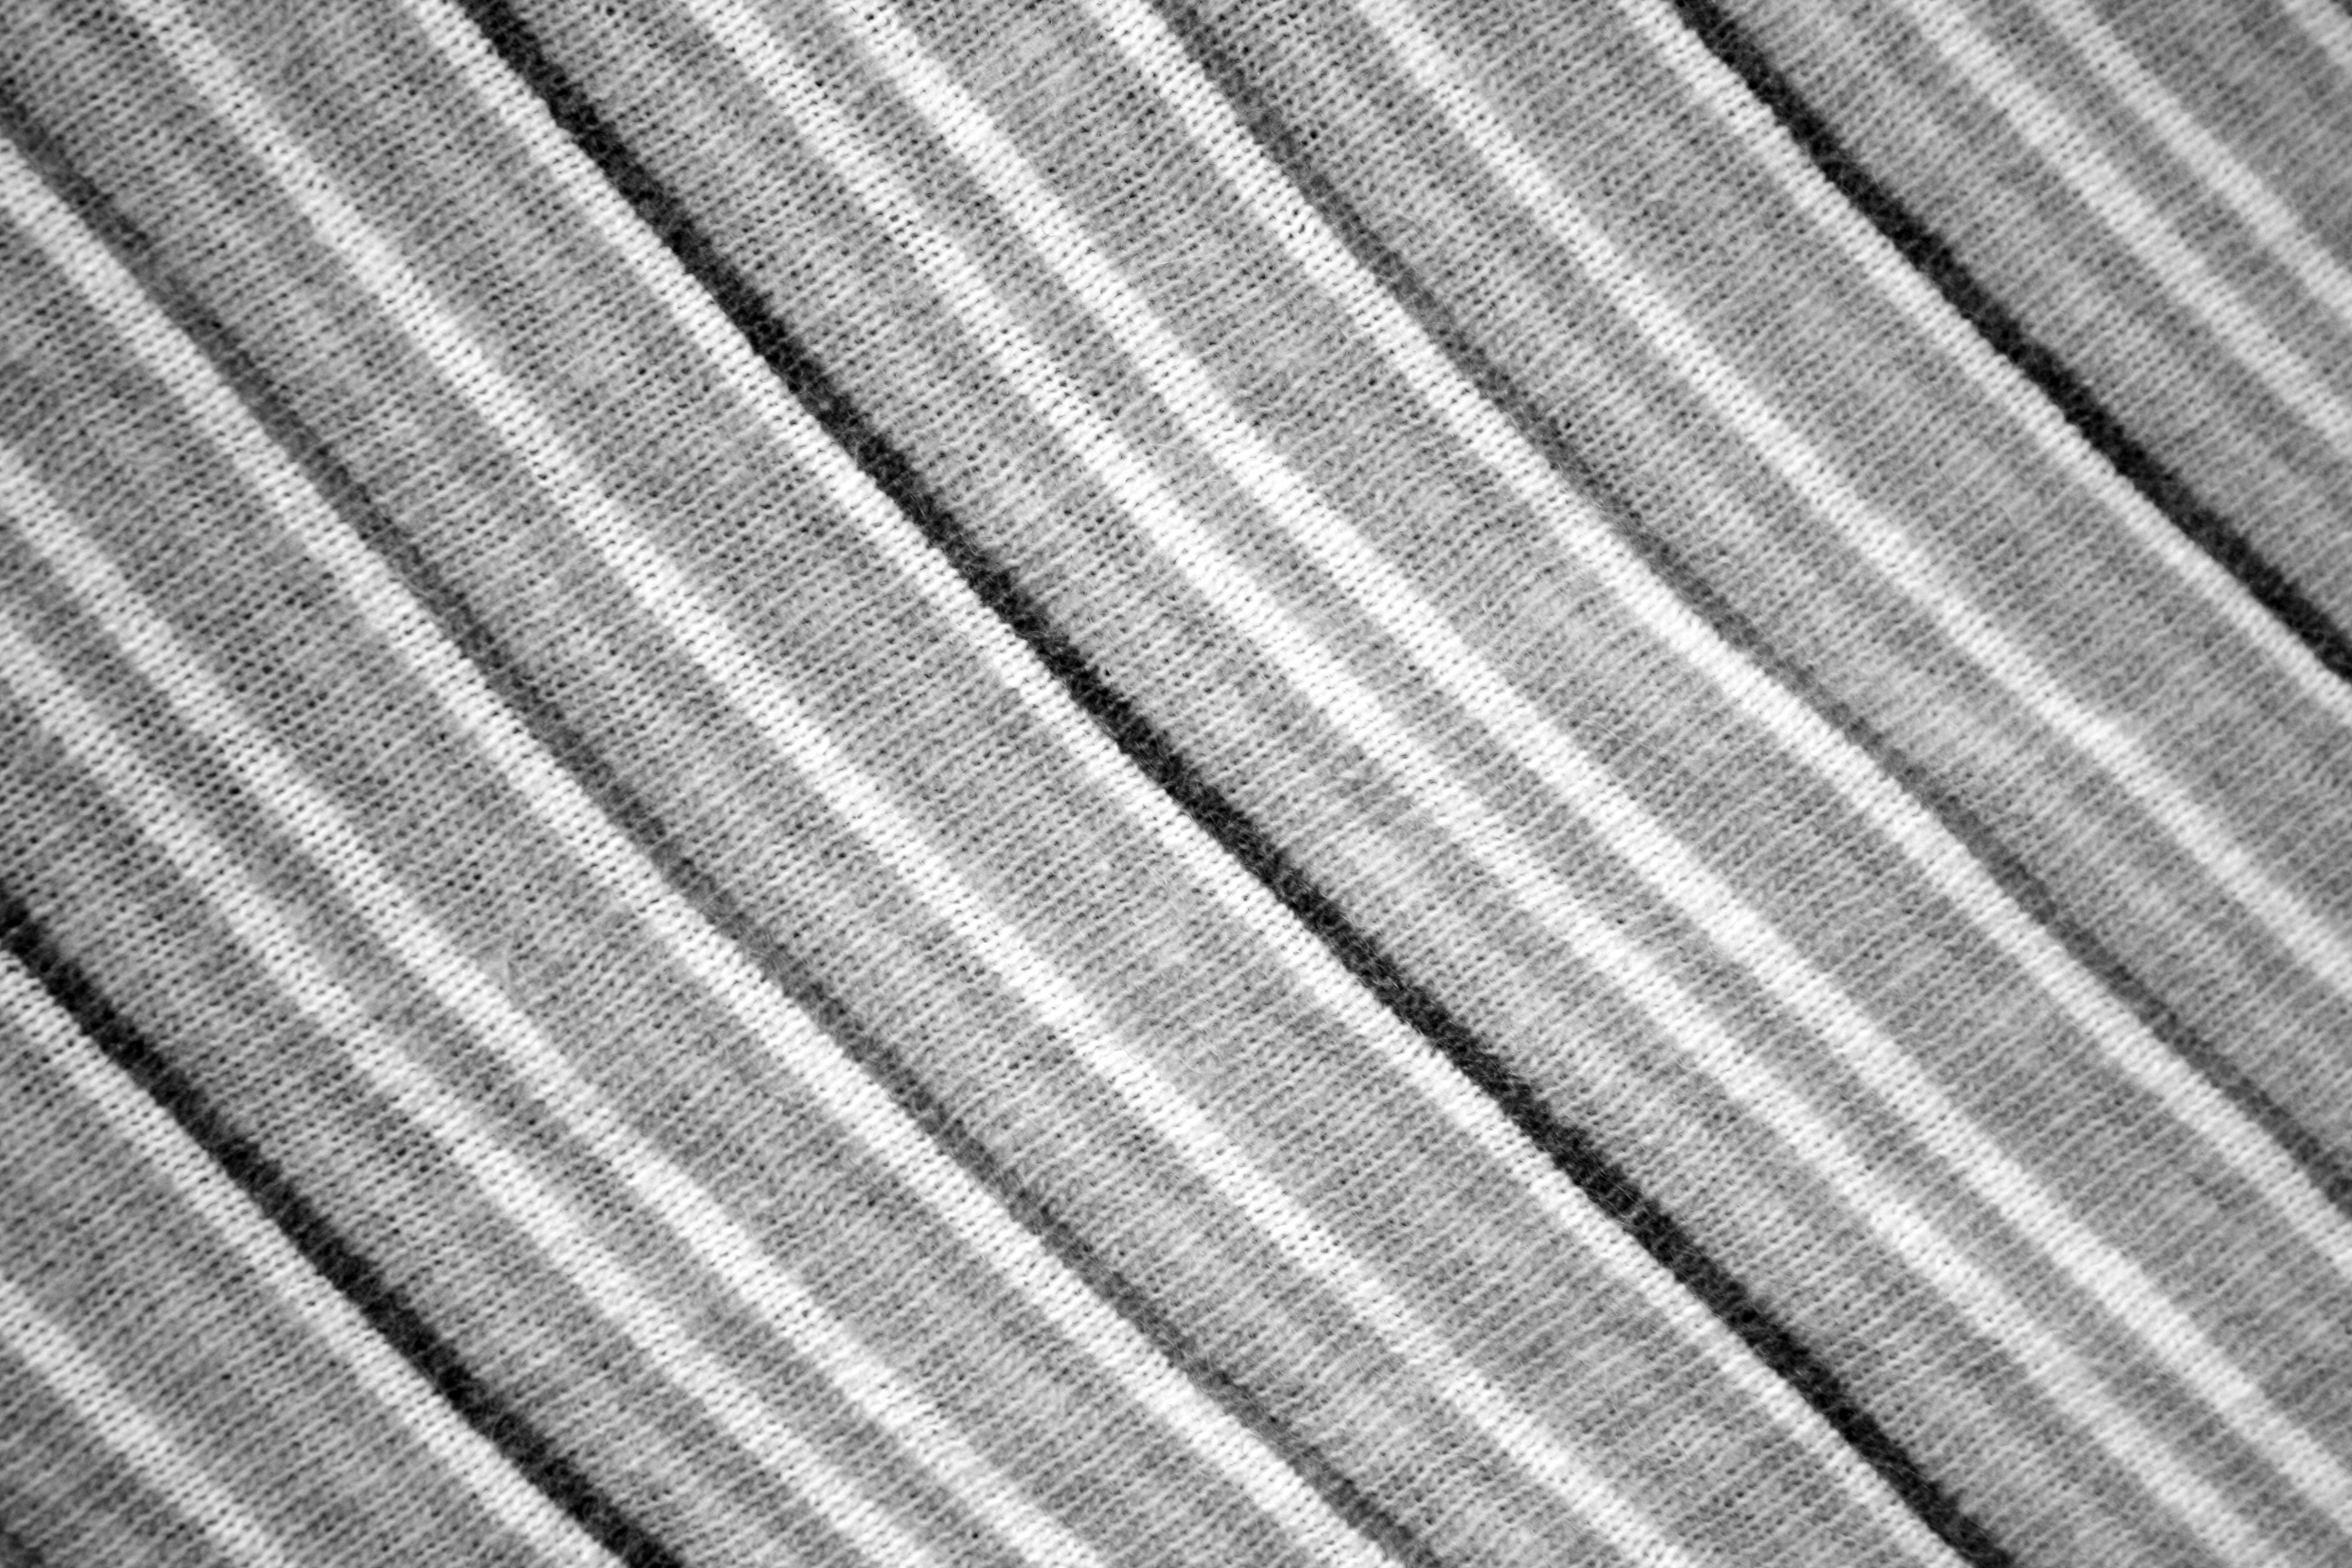 Black And White Striped Knit Fabric